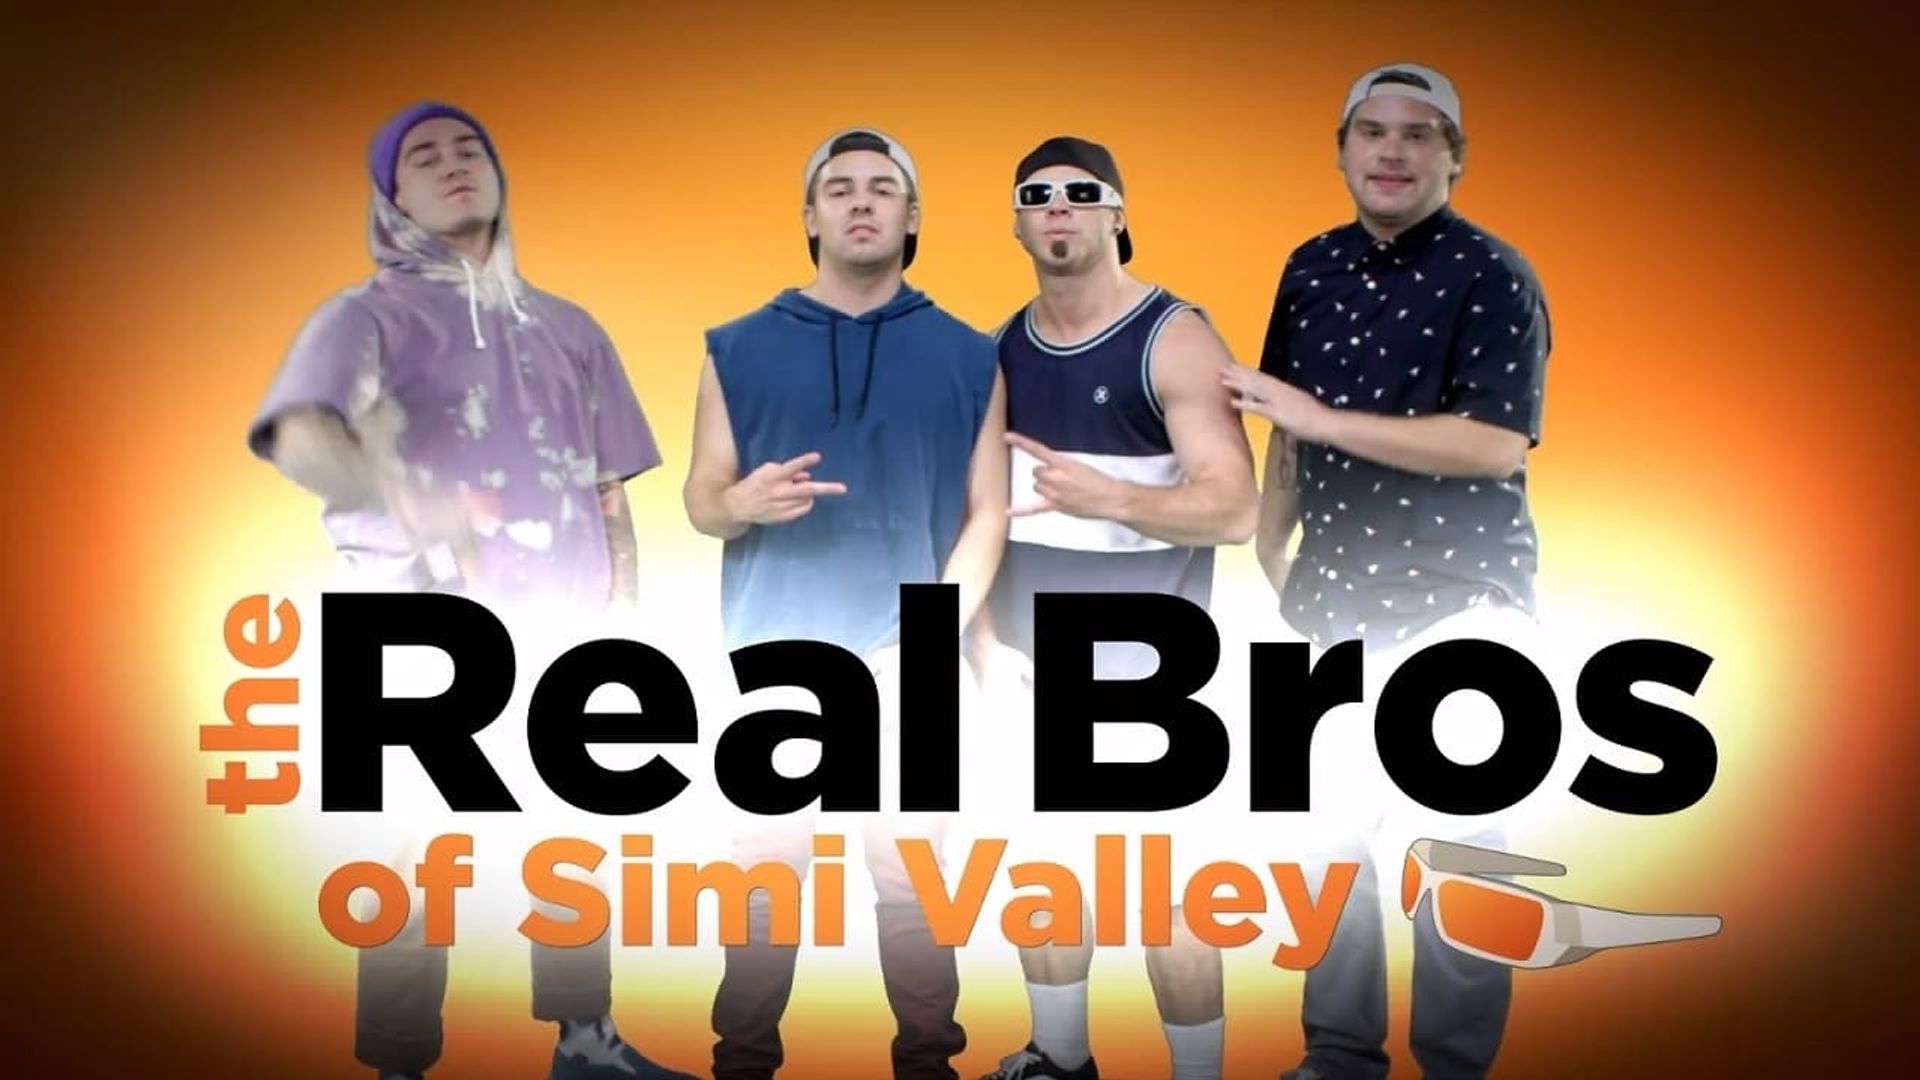 The Real Bros of Simi Valley background